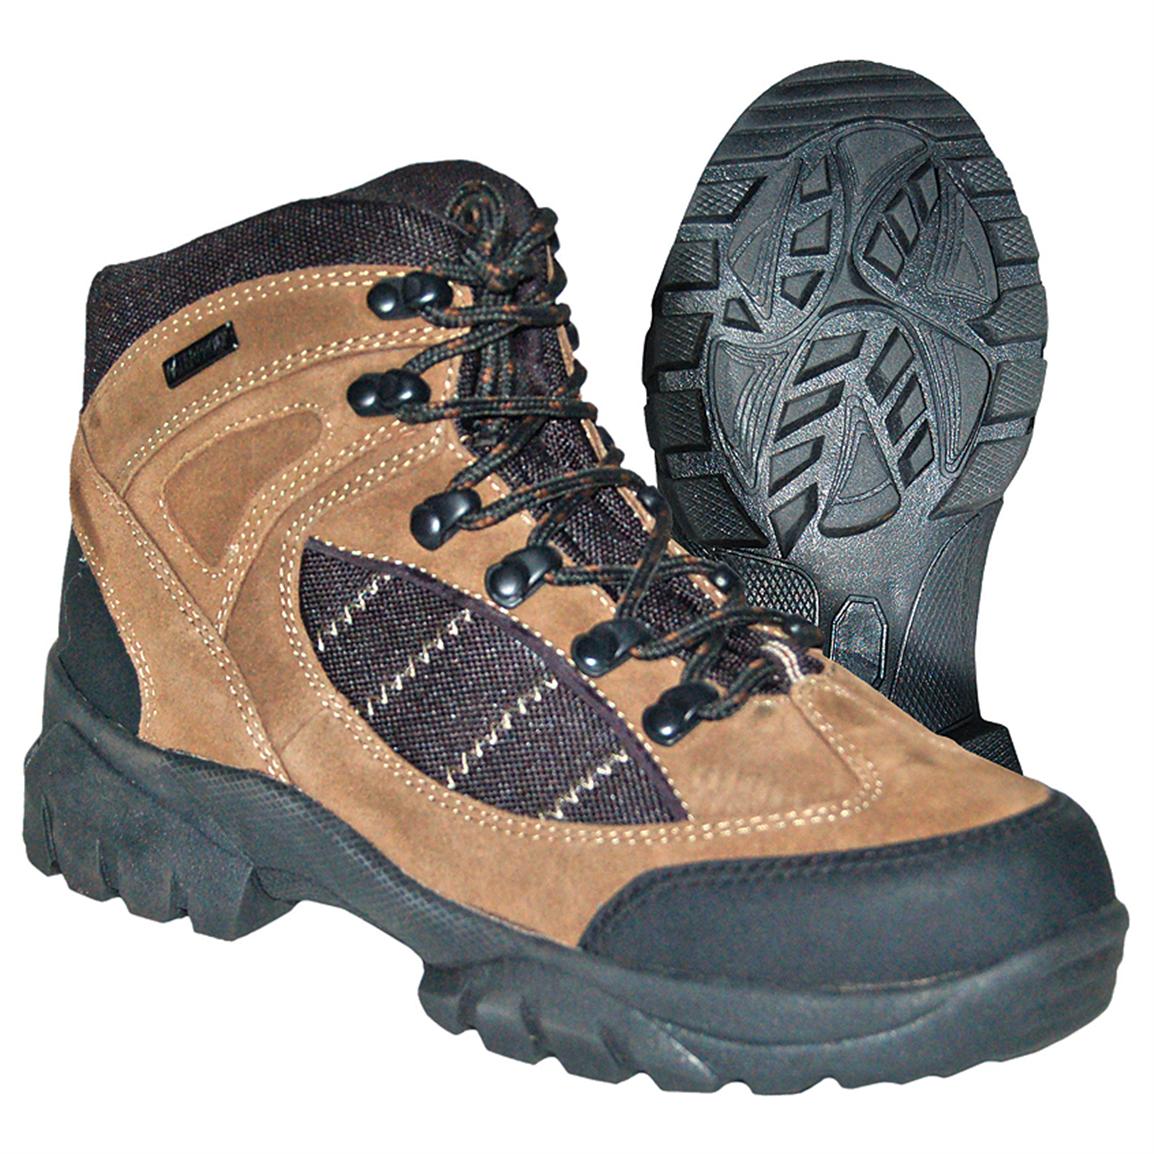 Men's Itasca™ Advance Hiking Boots, Brown - 188854, Hiking Boots ...